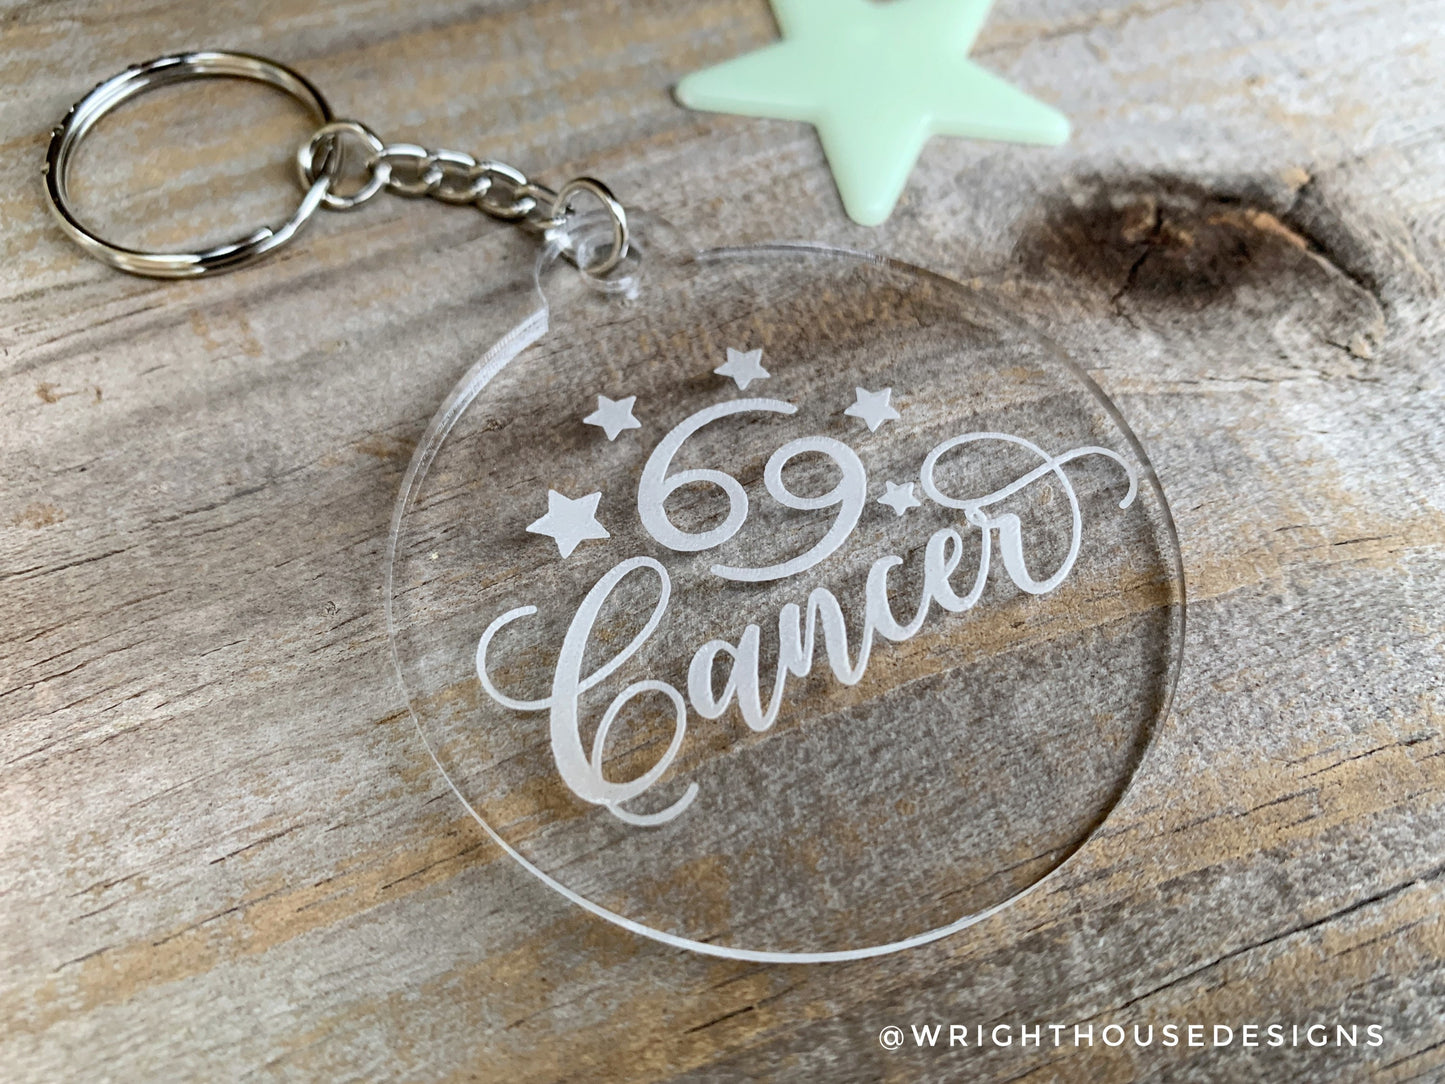 Laser Engraved Astrological Zodiac Acrylic Keychain - Constellation Star Sign Key Ring - Zodiac Sign and Stars - Personalized Novelty Gift